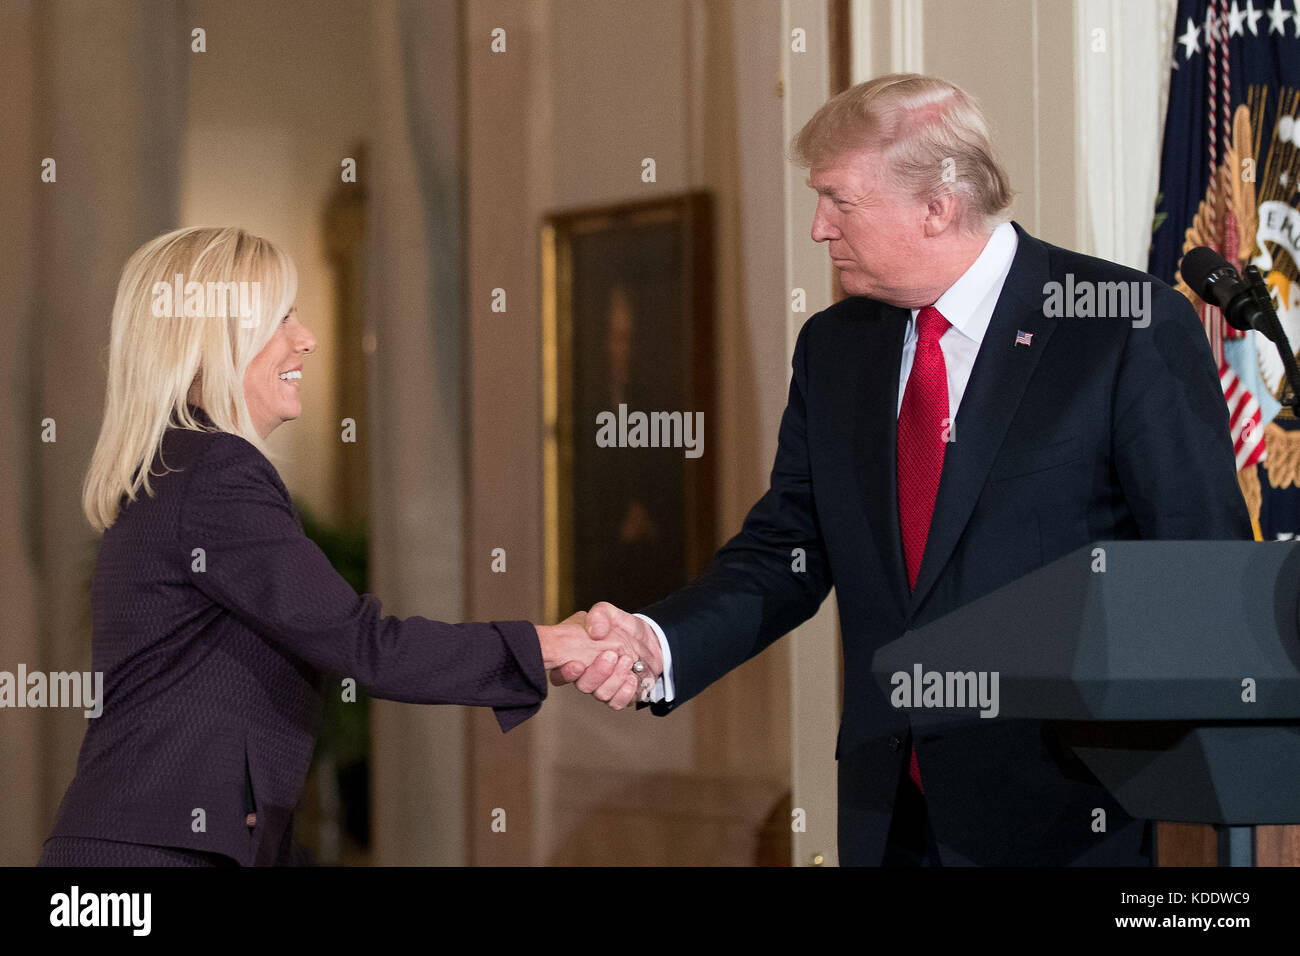 Washington, USA. 12th Oct, 2017. U.S. President Donald Trump (R) shakes hands with Kirstjen Nielsen during her nomination announcement at the White House in Washington, DC, the United States, on Oct. 12, 2017. Trump on Wednesday nominated Kirstjen Nielsen, an aide to White House Chief of Staff John Kelly, to be Secretary of Homeland Security. Credit: Ting Shen/Xinhua/Alamy Live News Stock Photo